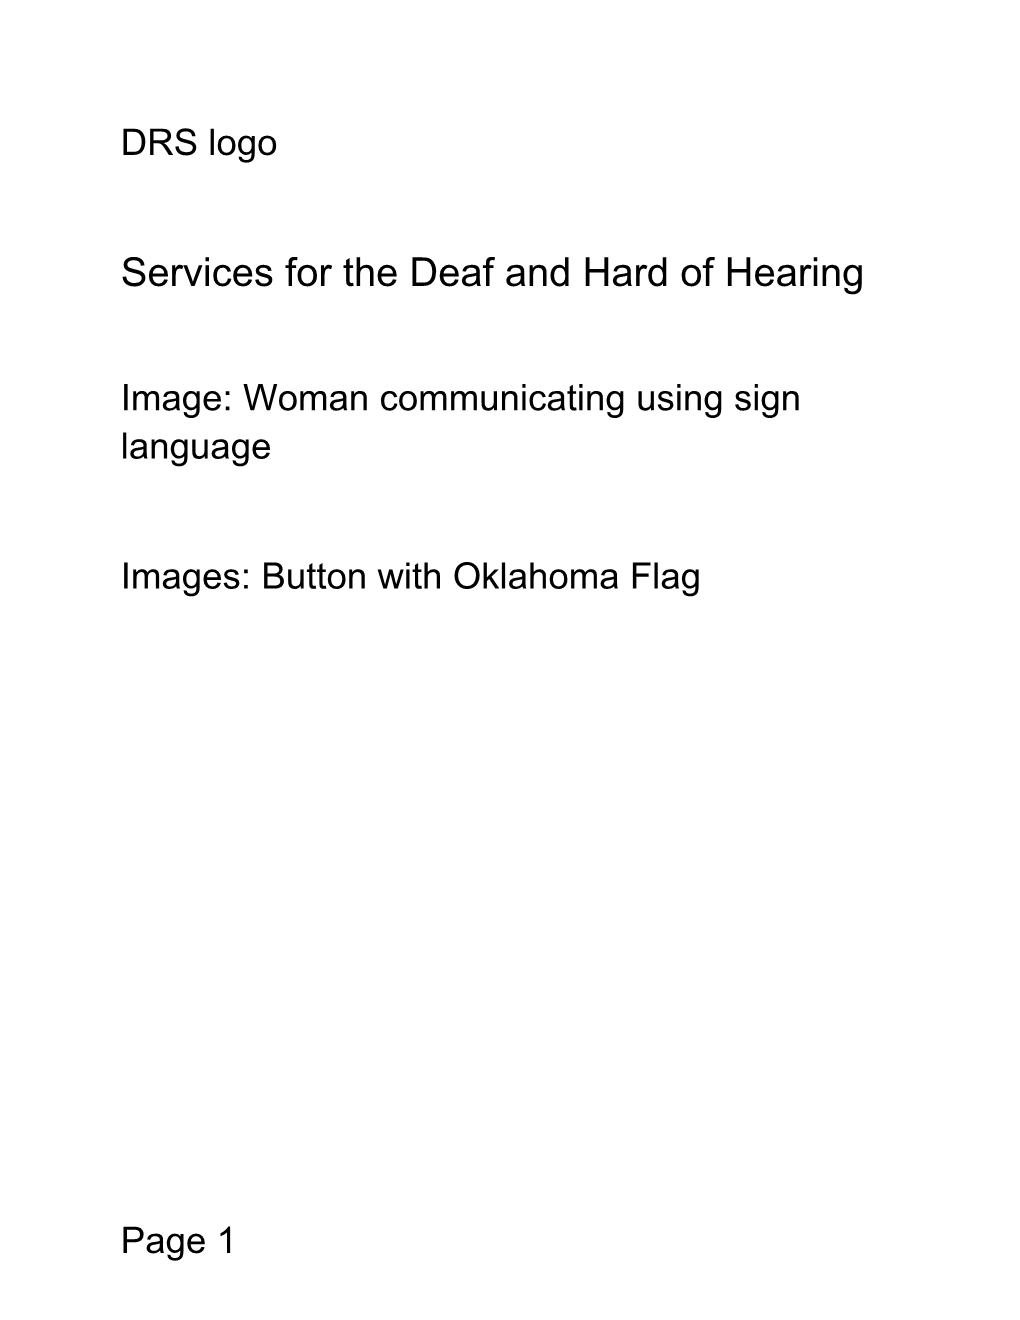 Services for the Deaf and Hard of Hearing